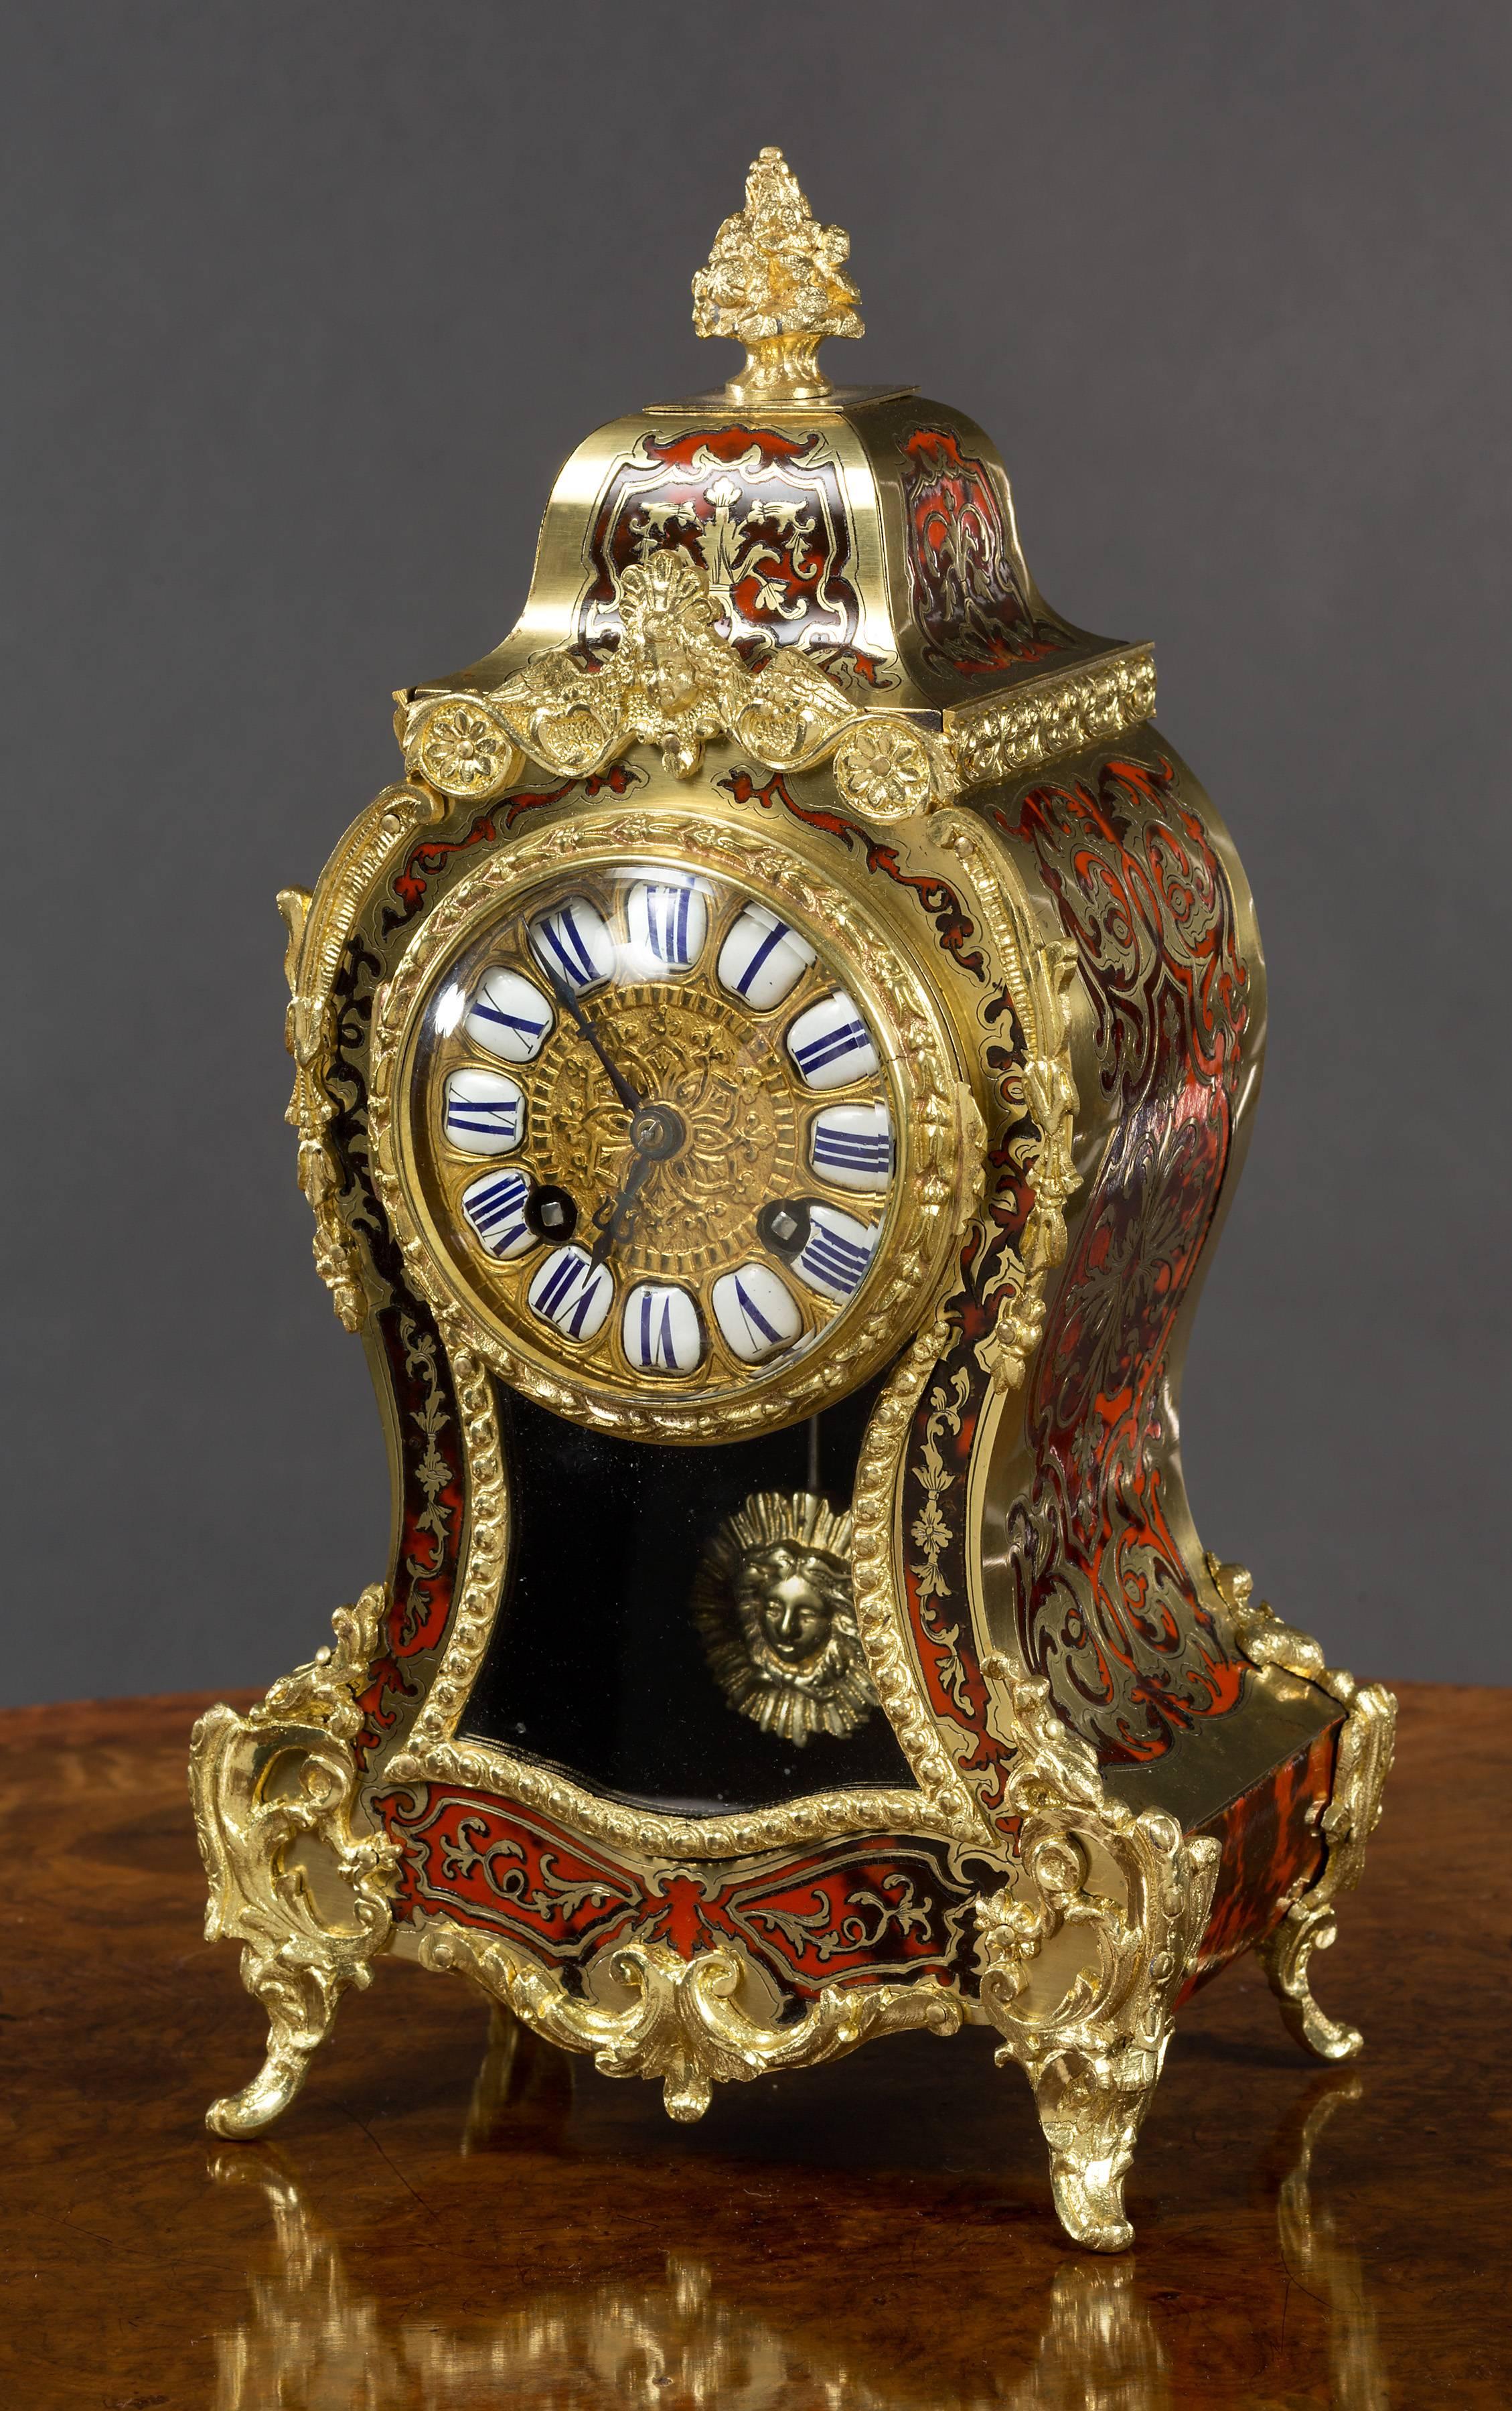 French tortoiseshell boulle clock with ormolu mounts, standing on outswept feet and surmounted by a gilded finial.

Gilded, raised dial centre with segmented enamel Roman numerals and original blued steel hands.

Eight day movement striking the